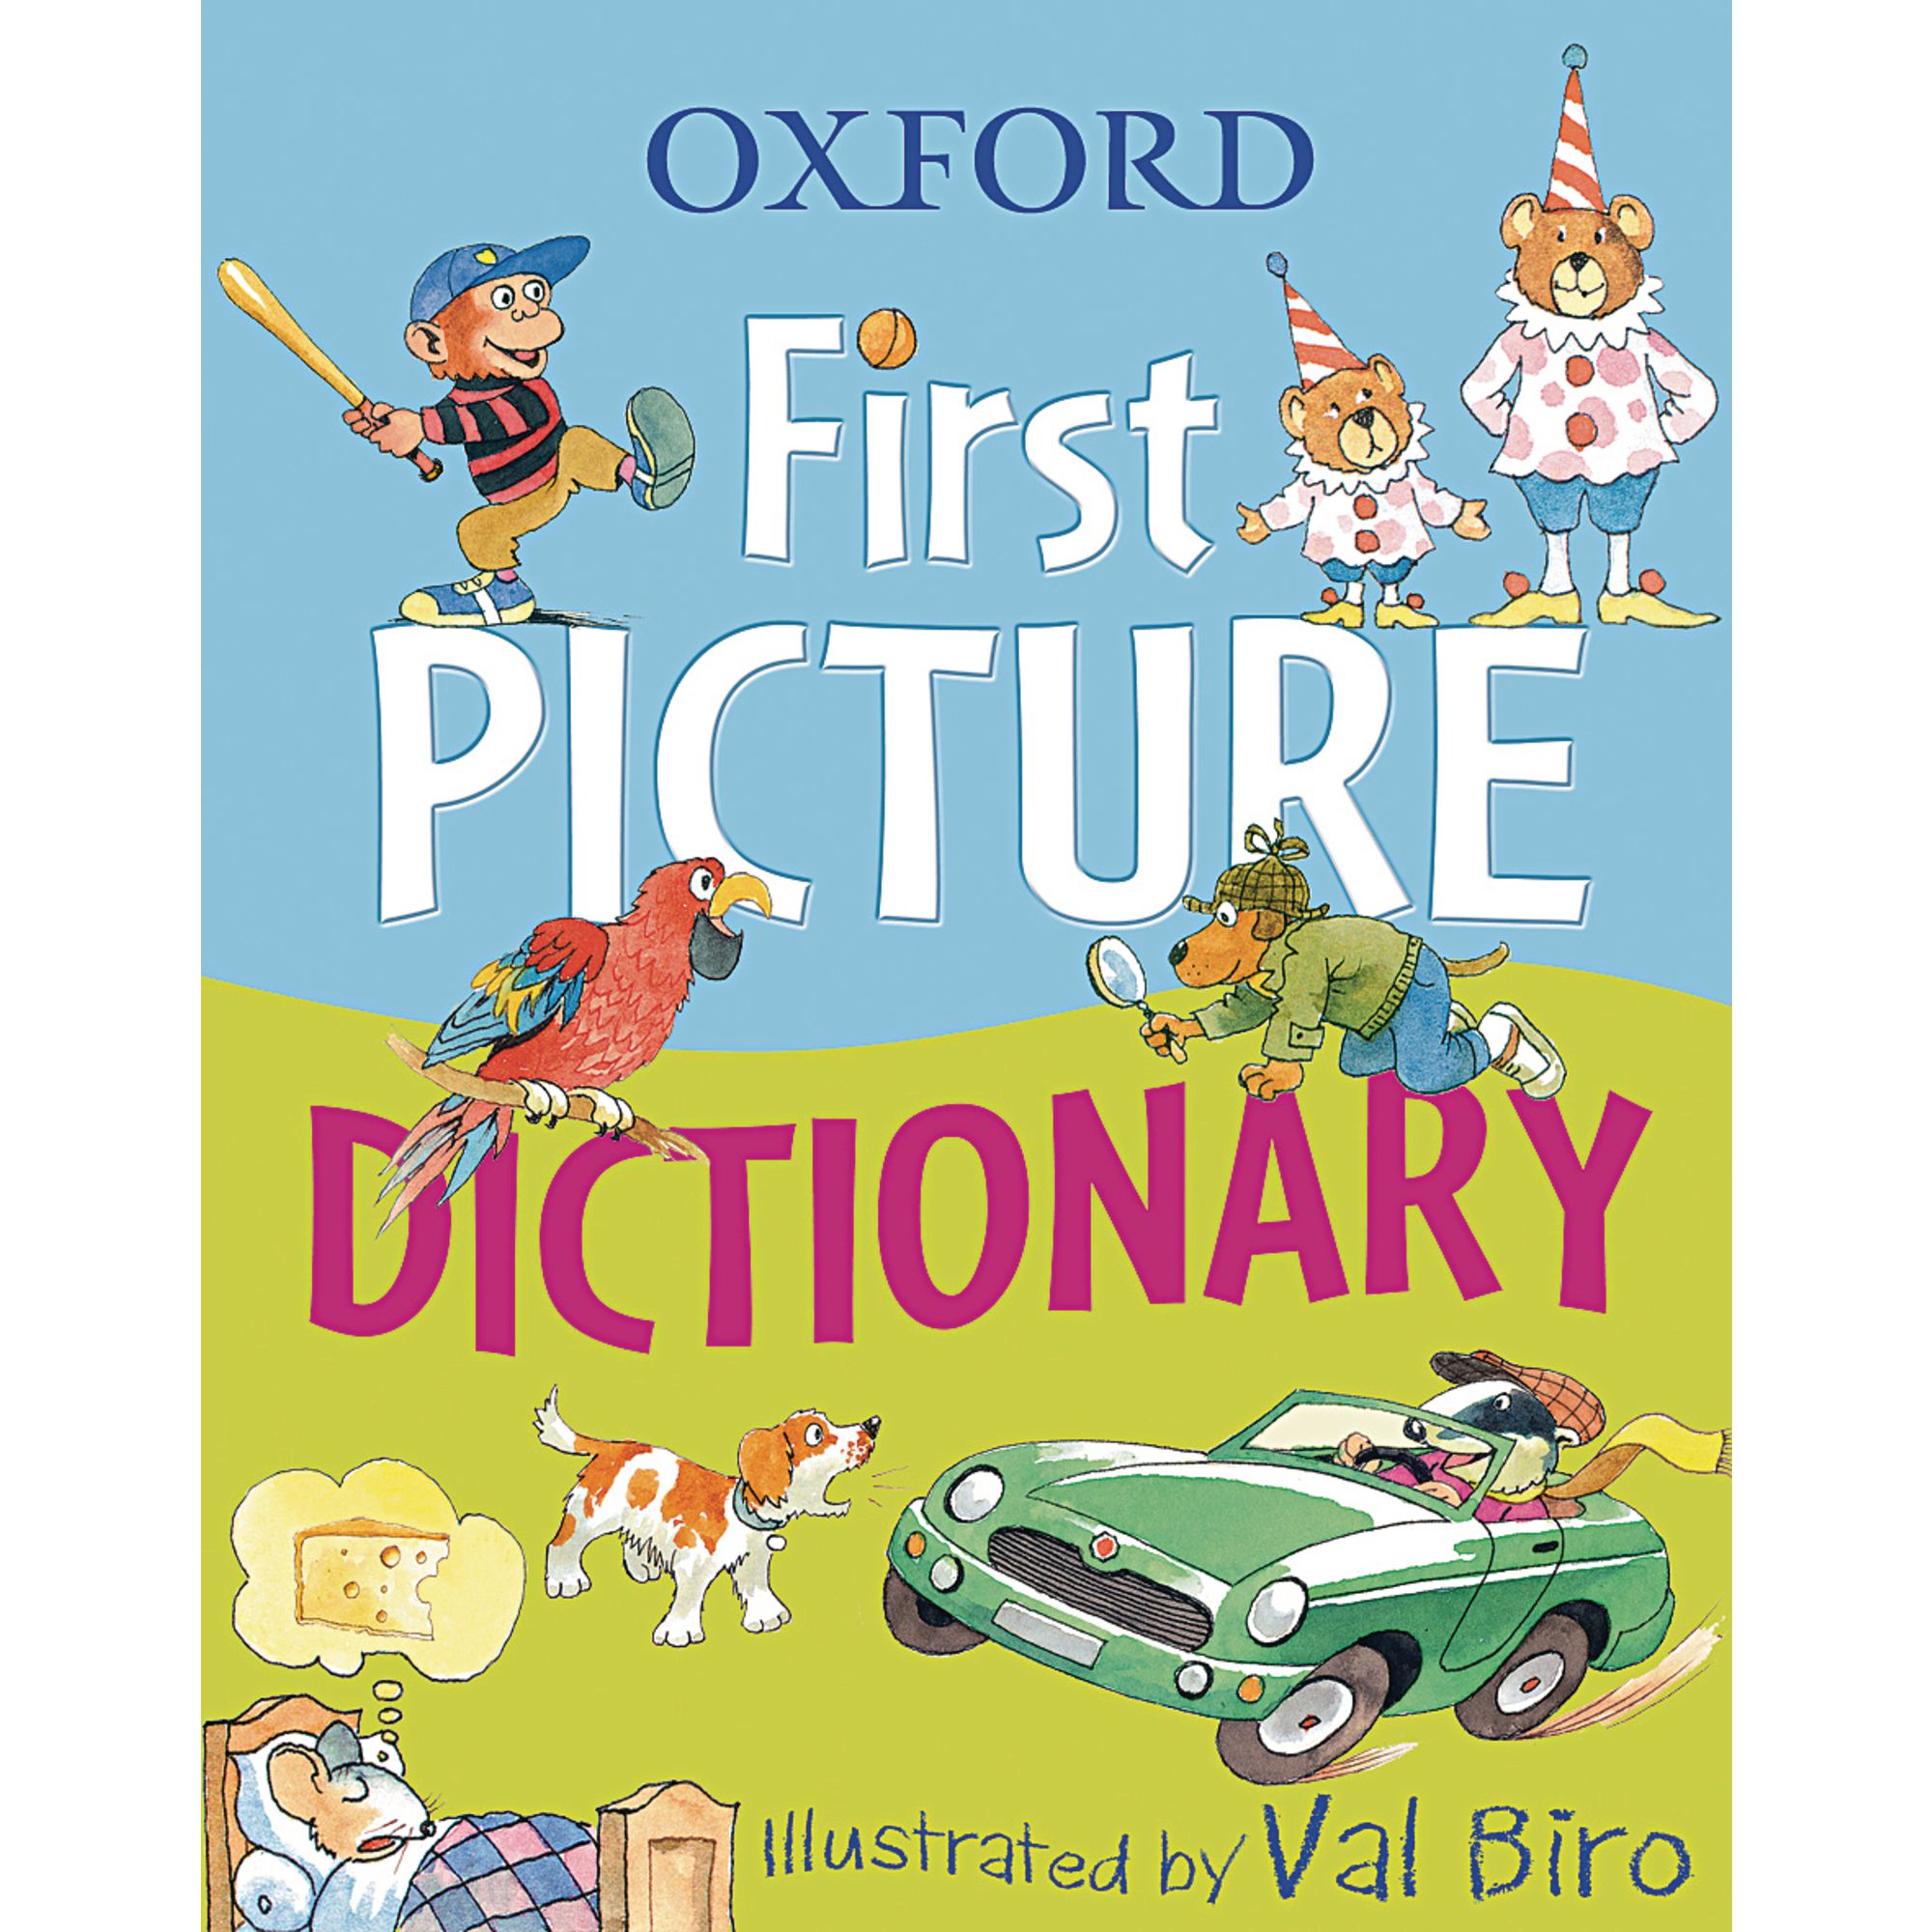 oxford illustrated dictionary pdf free download